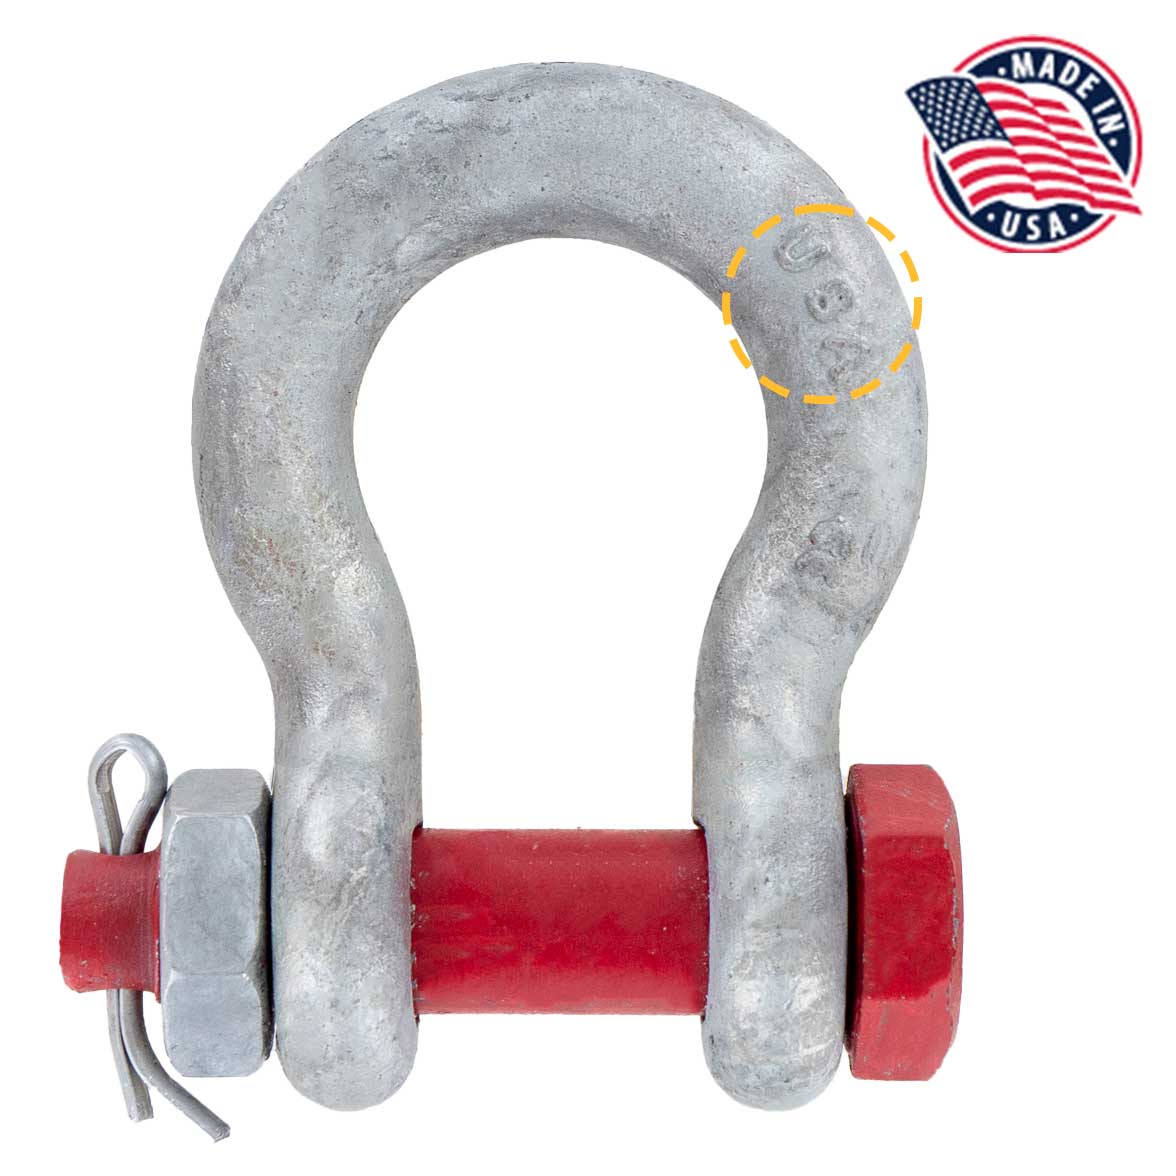 1-1/2" Crosby® Bolt Type Anchor Shackle | G-2130 - 17 Ton made in USA